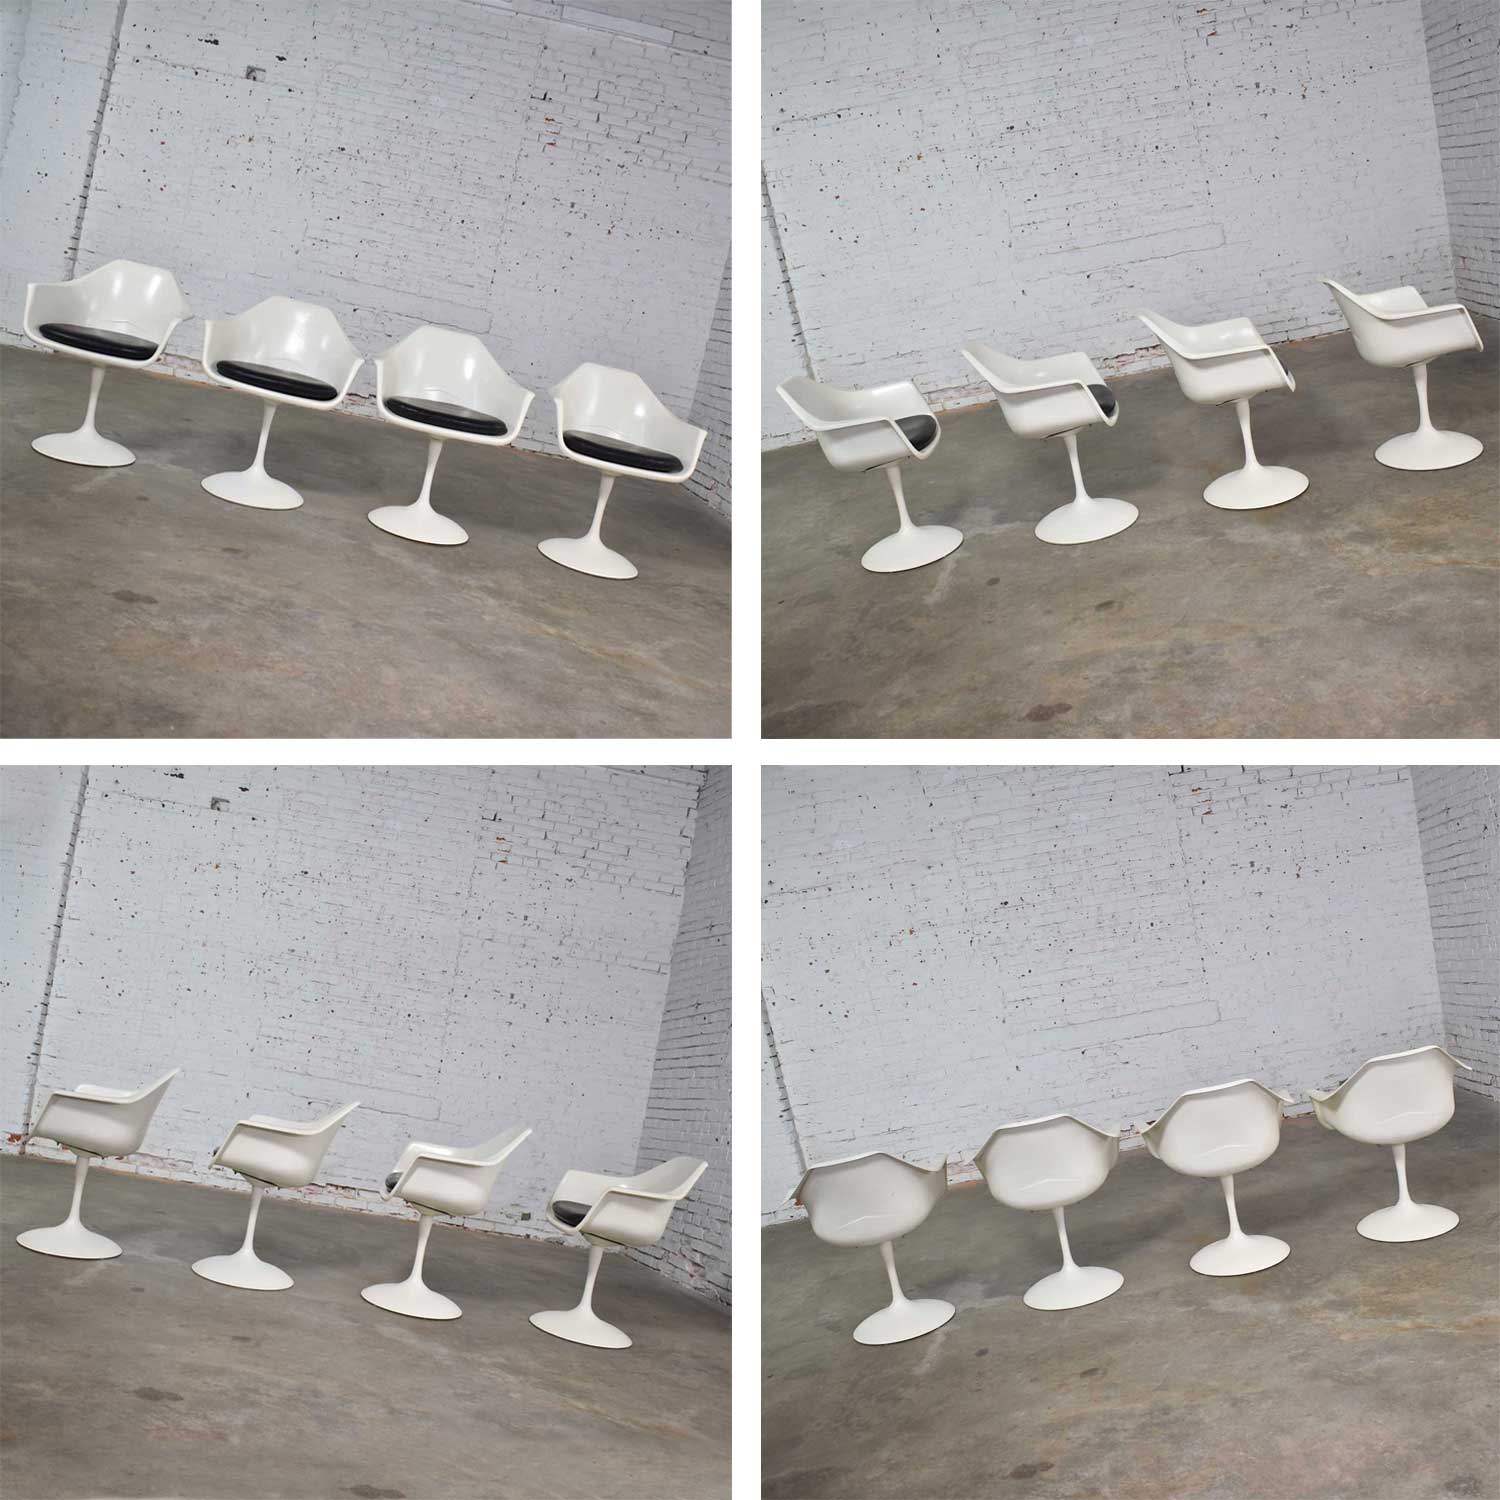 Tulip Style White Fiberglass Swivel Chairs and Table by Umanoff for Contemporary Shells